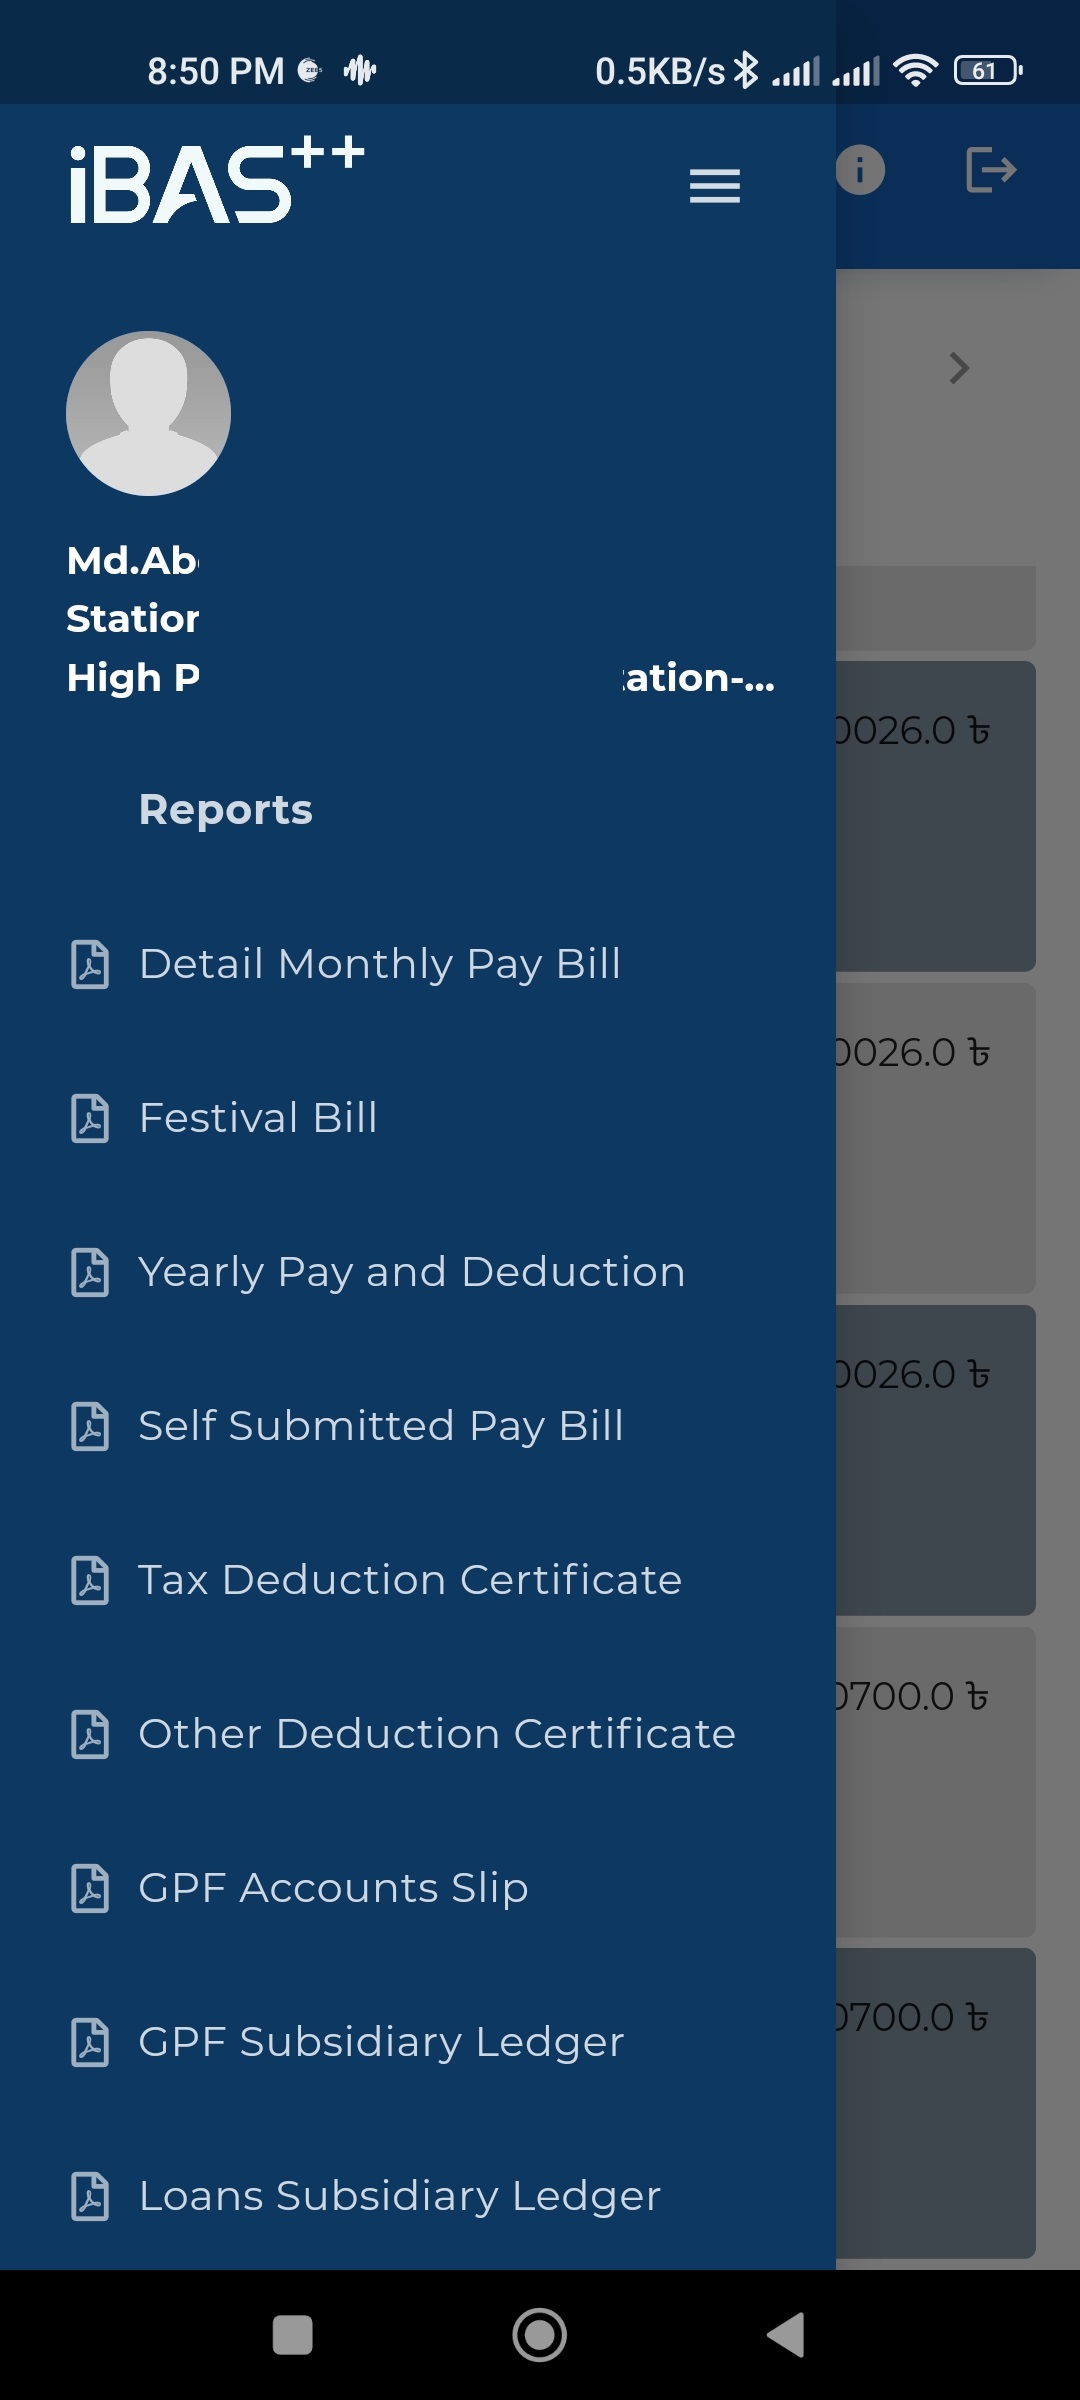 Pay bill Submission by ibas++ android app